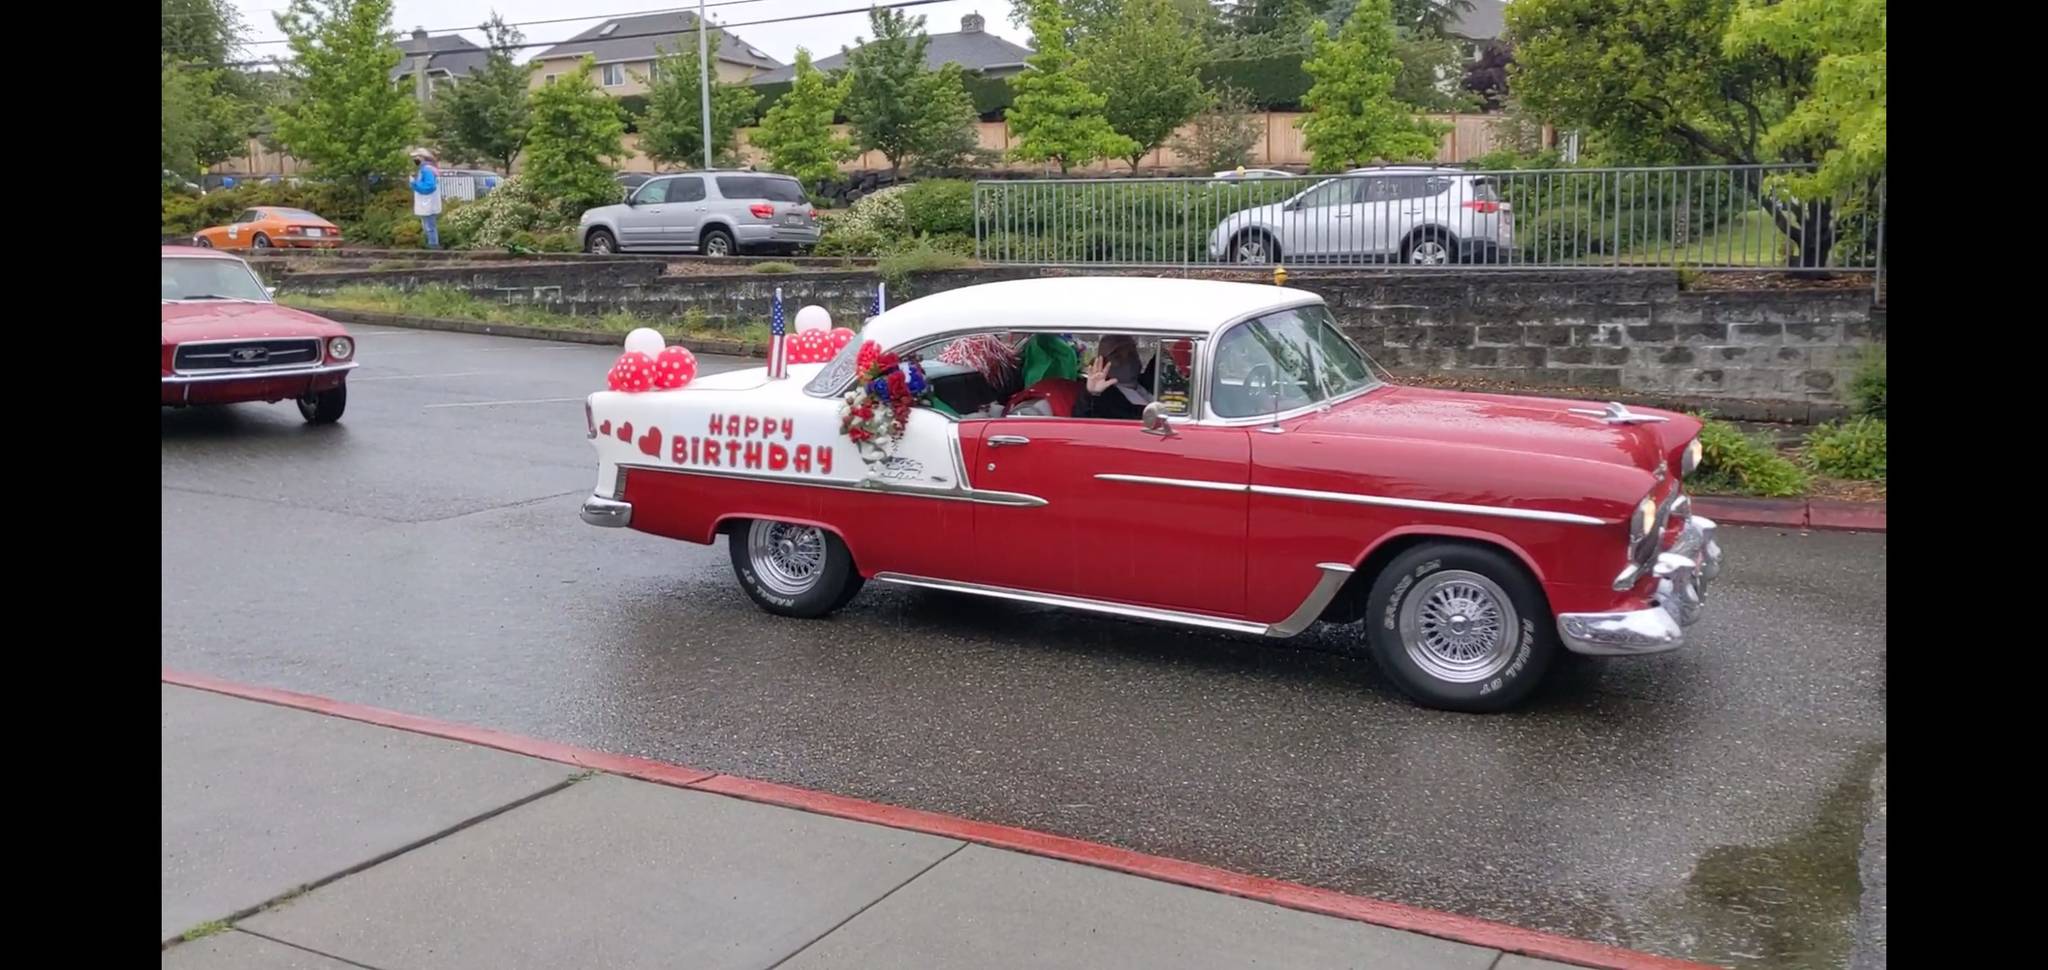 One of the many cars that celebrated 13-year-old Anthony Lawson on his birthday. Photo courtesy of Theresa Lawson.